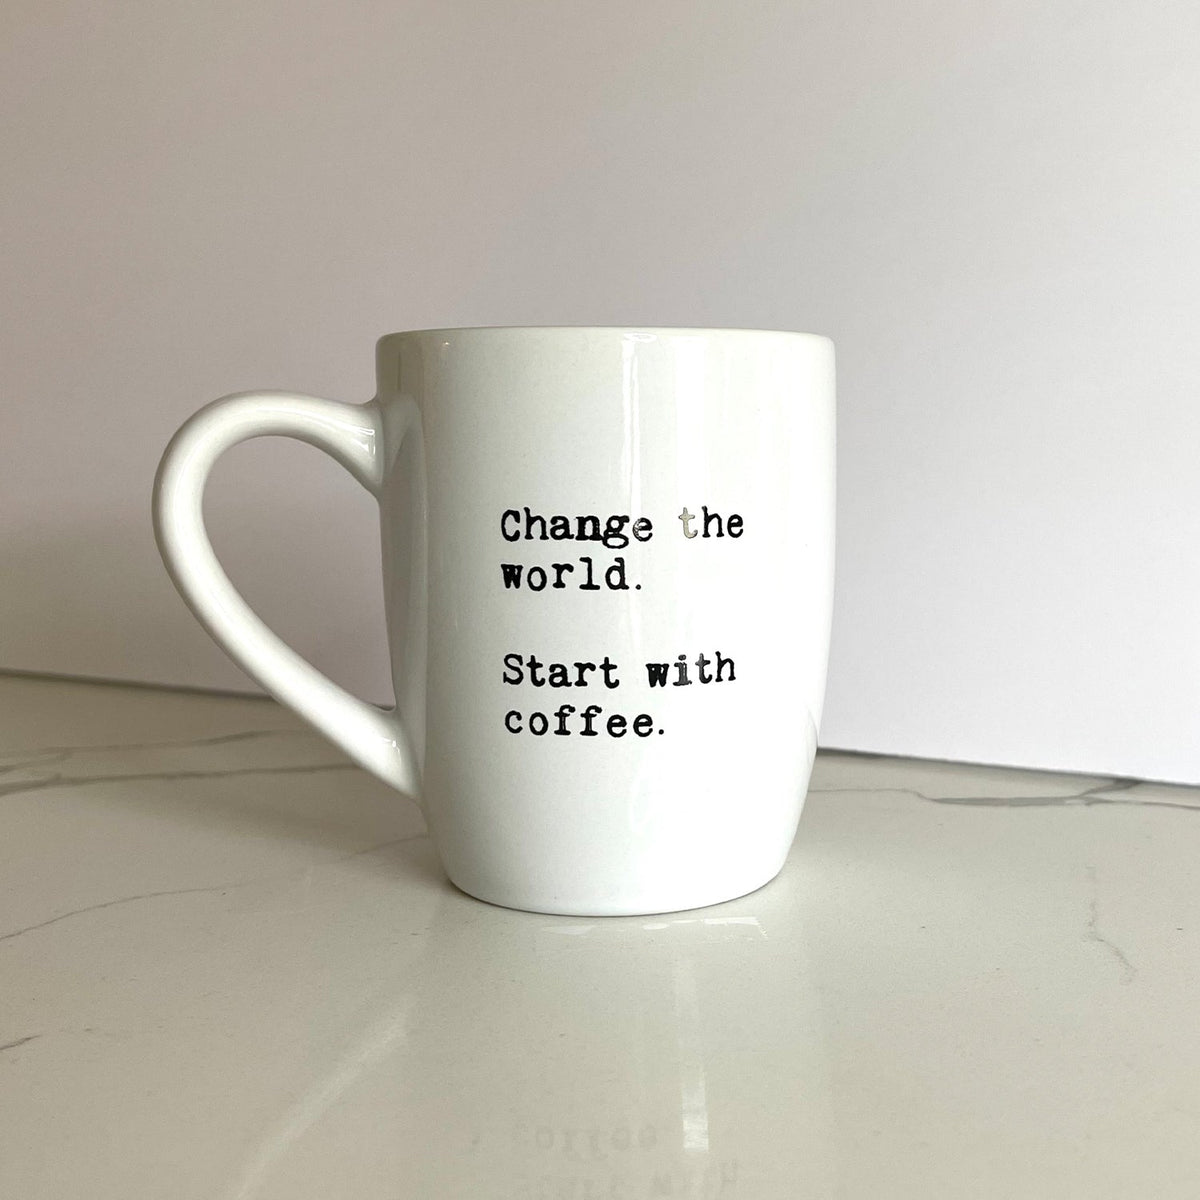 Change the world. Start with coffee.